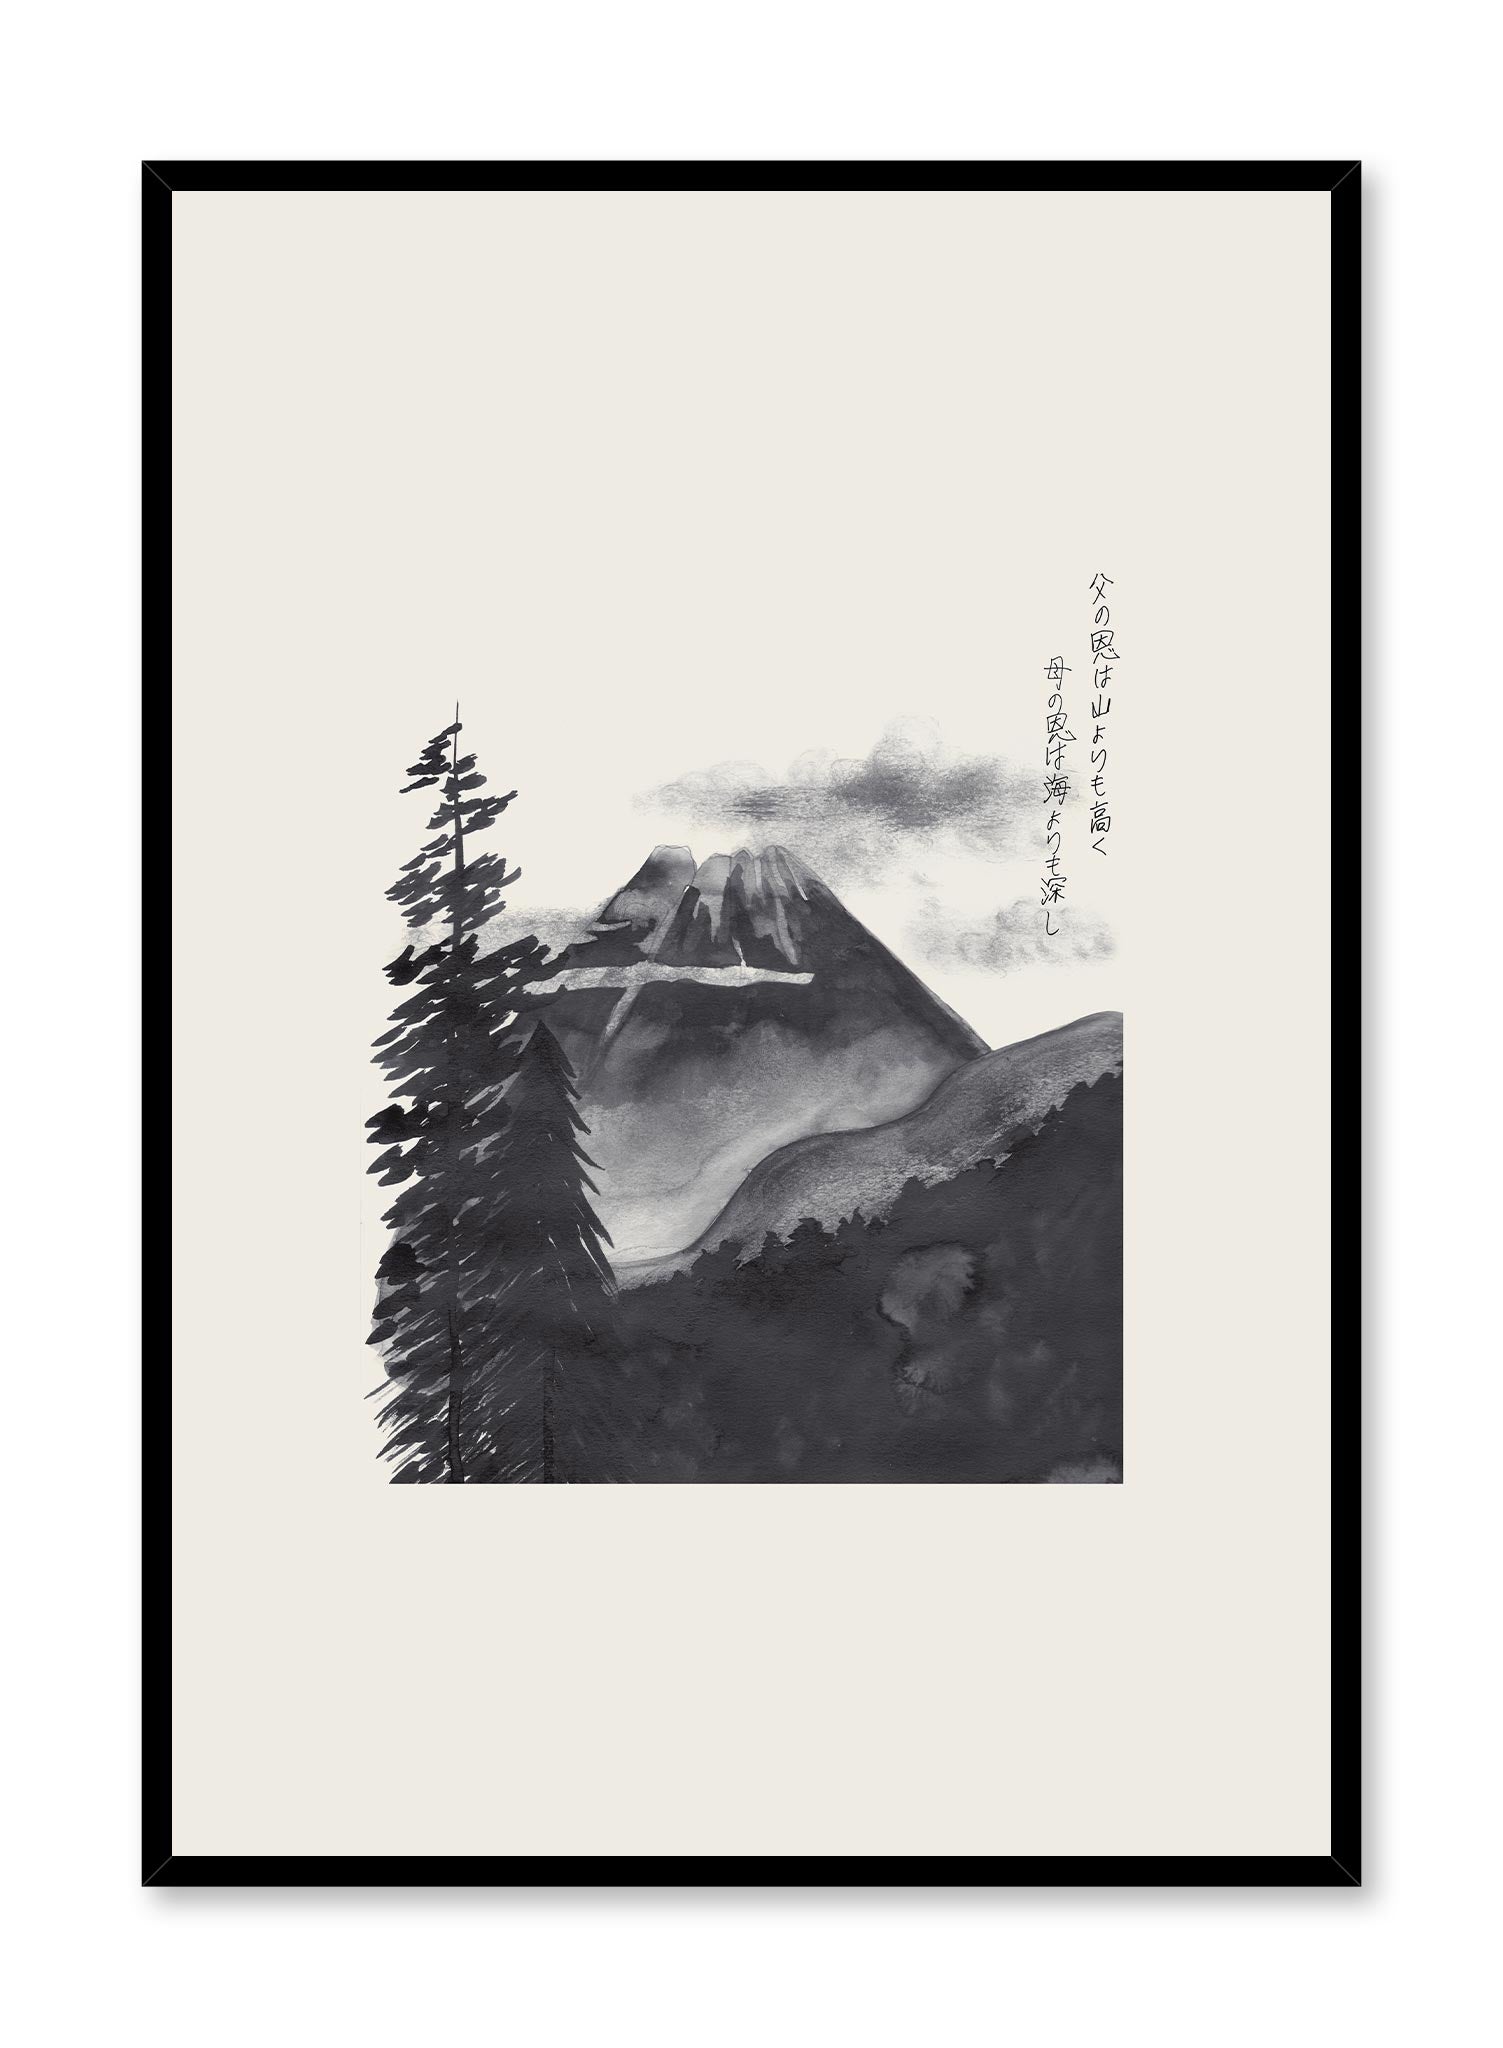 Yama is a minimalist illustration by Opposite Wall of the view of a tall snowy forest afar.